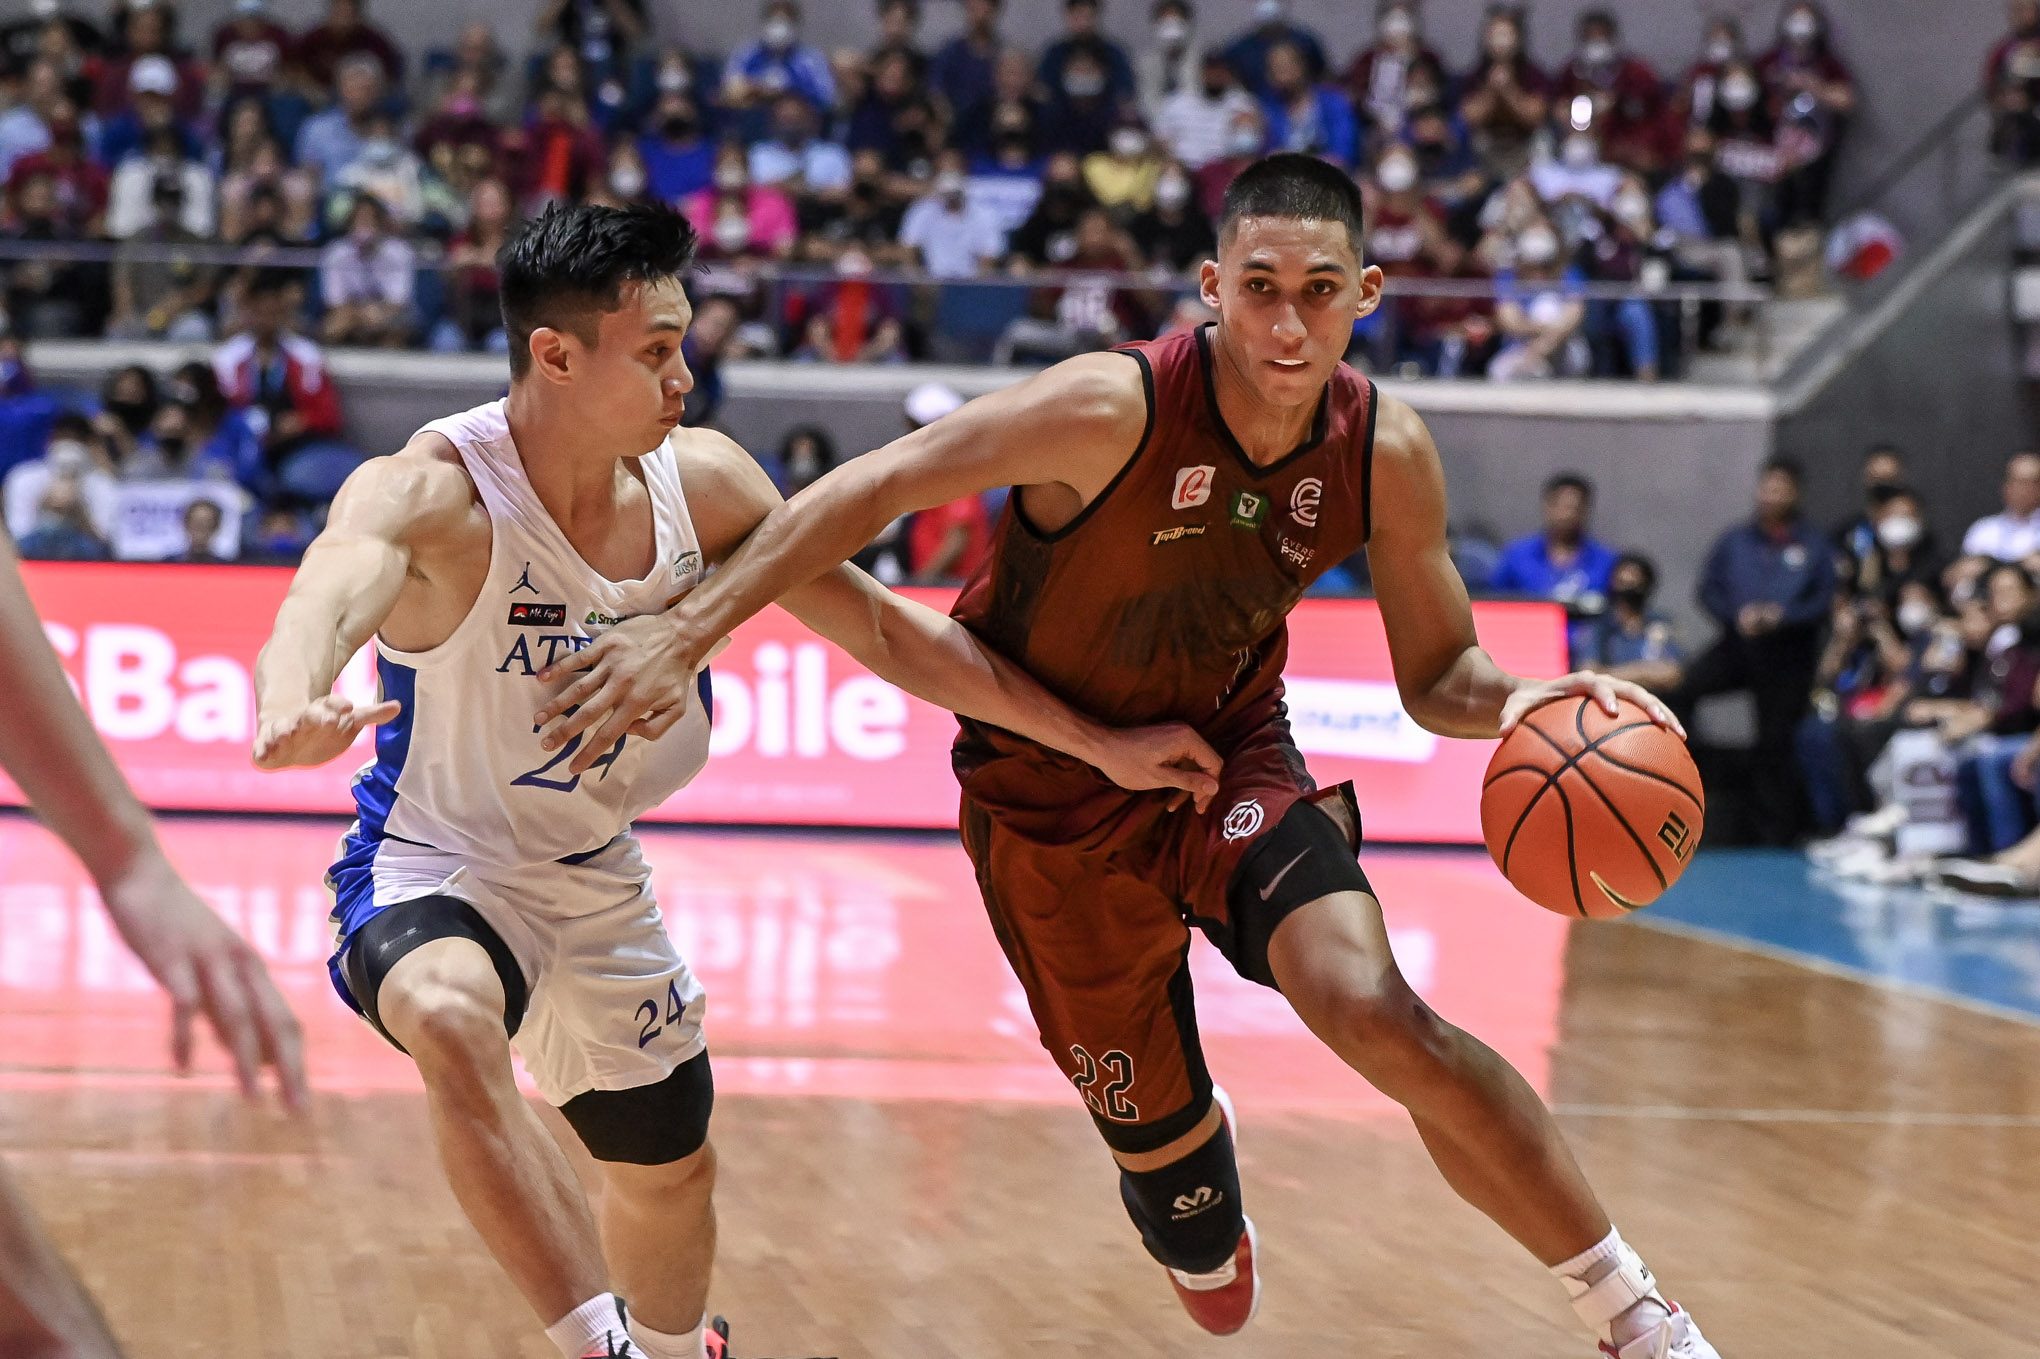 ‘Not in the cards’: Lucero still vows to be with Maroons in title decider